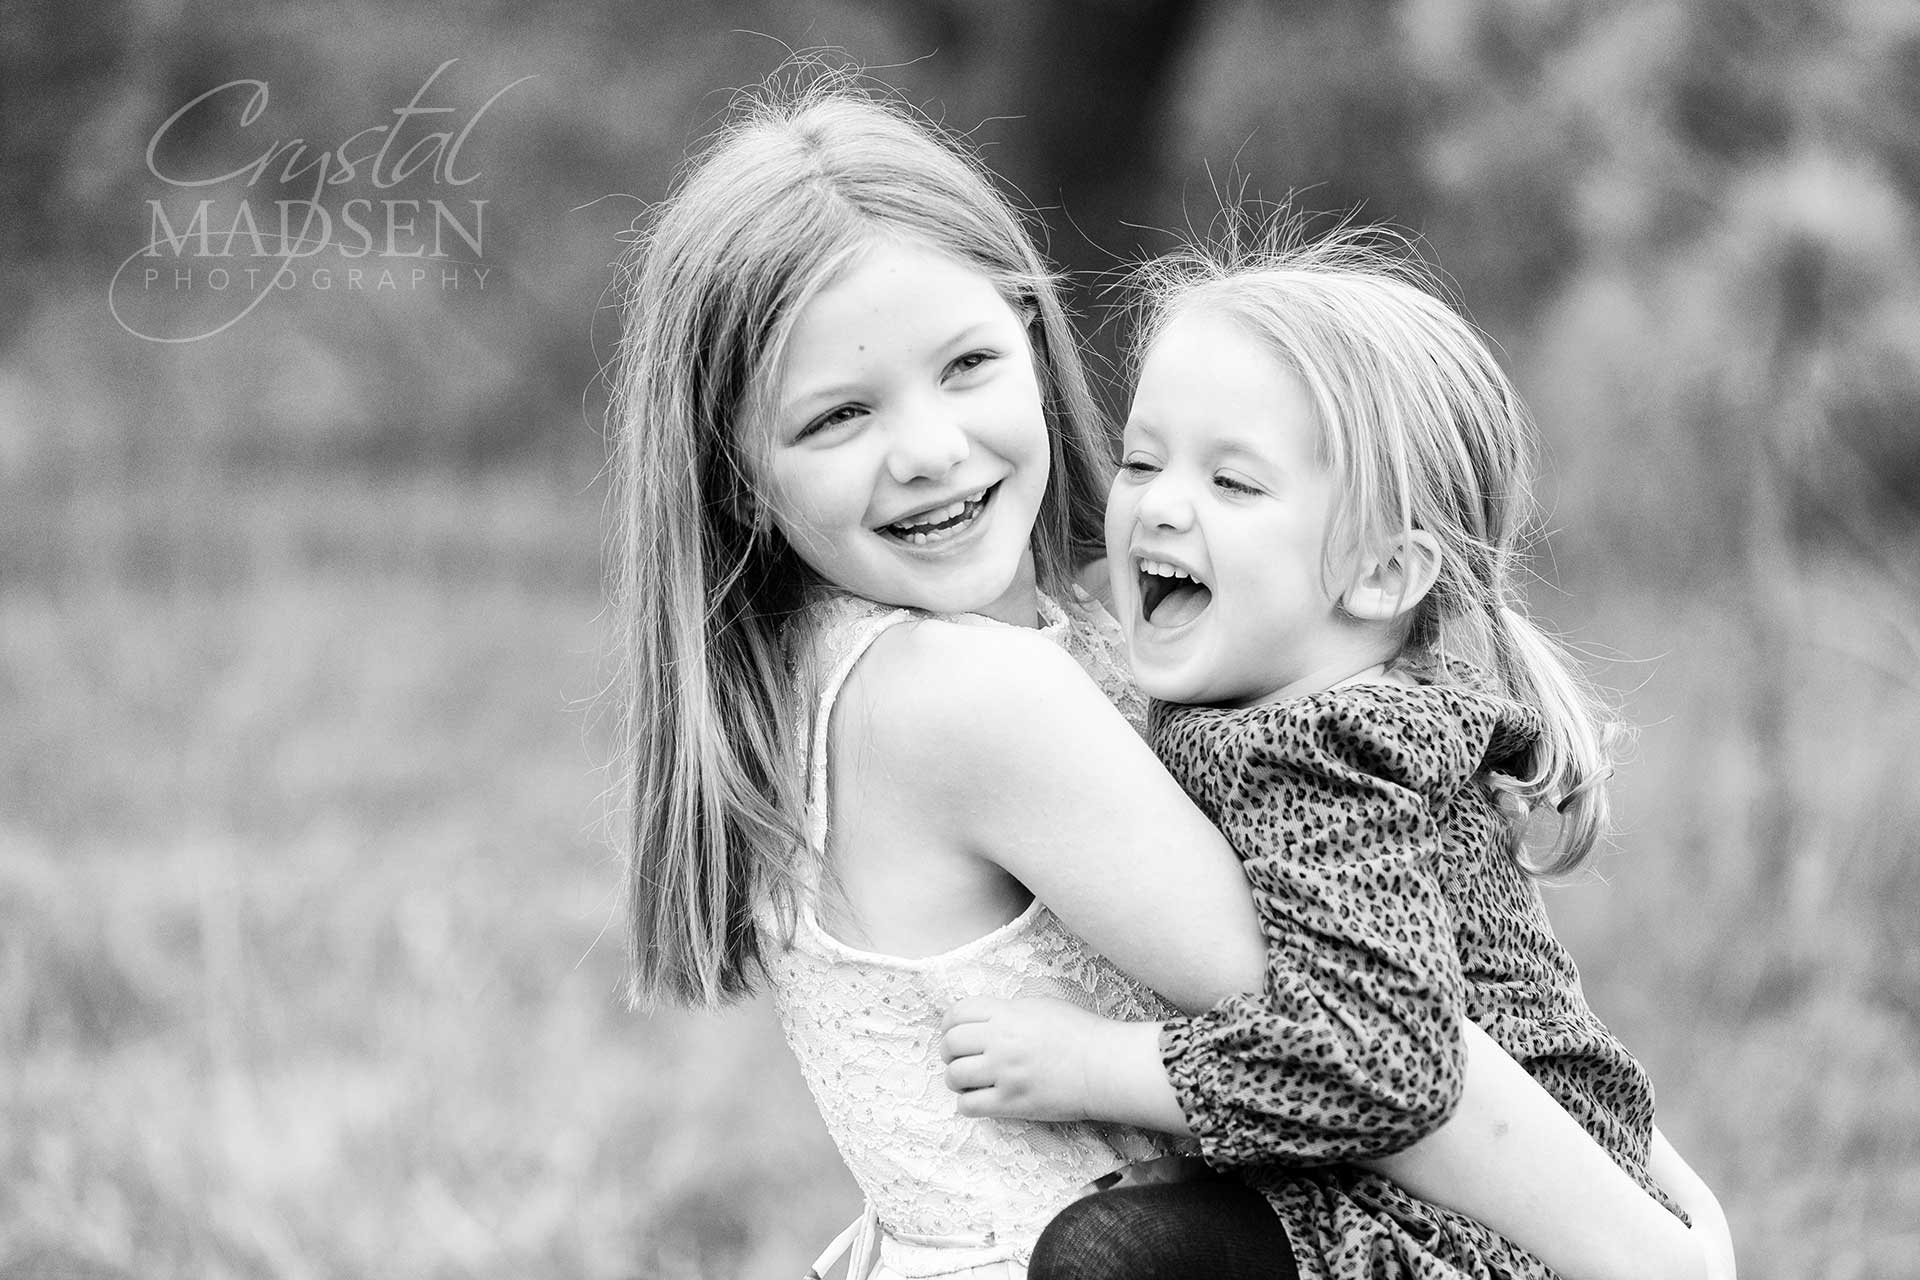 Fun & Unique Family Portraits - Crystal Madsen Photography